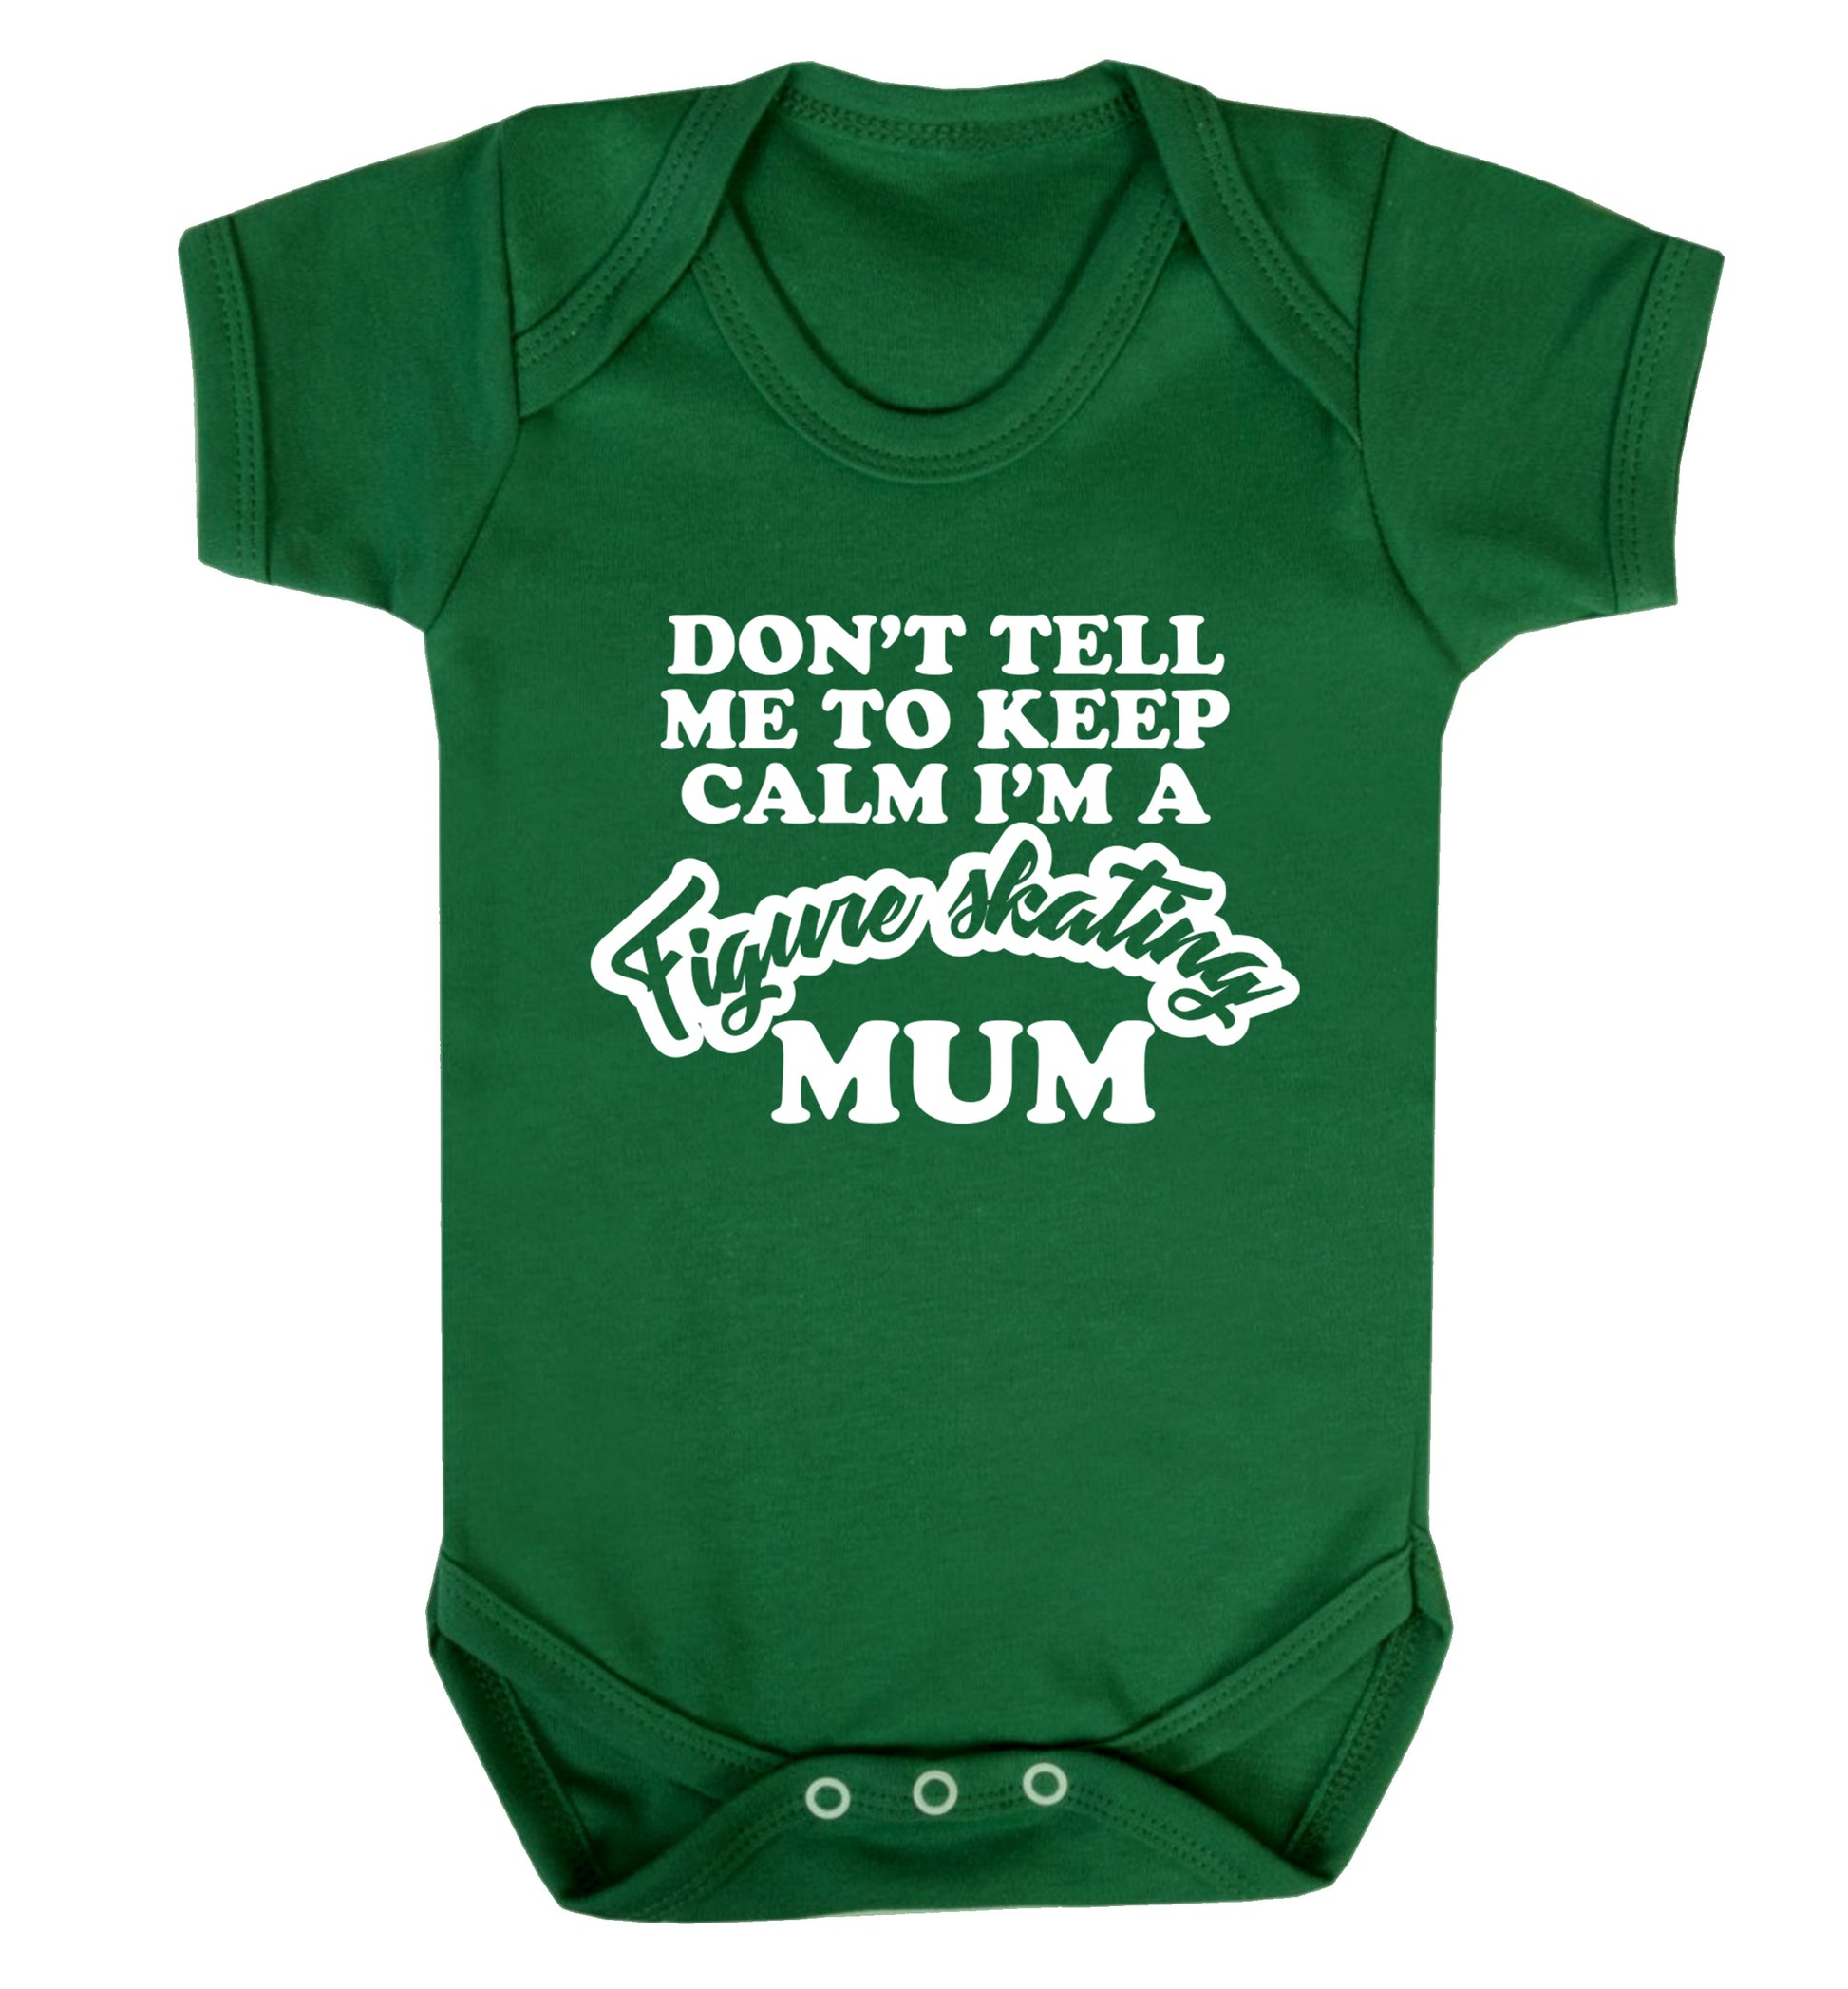 Don't tell me to keep calm I'm a figure skating mum Baby Vest green 18-24 months